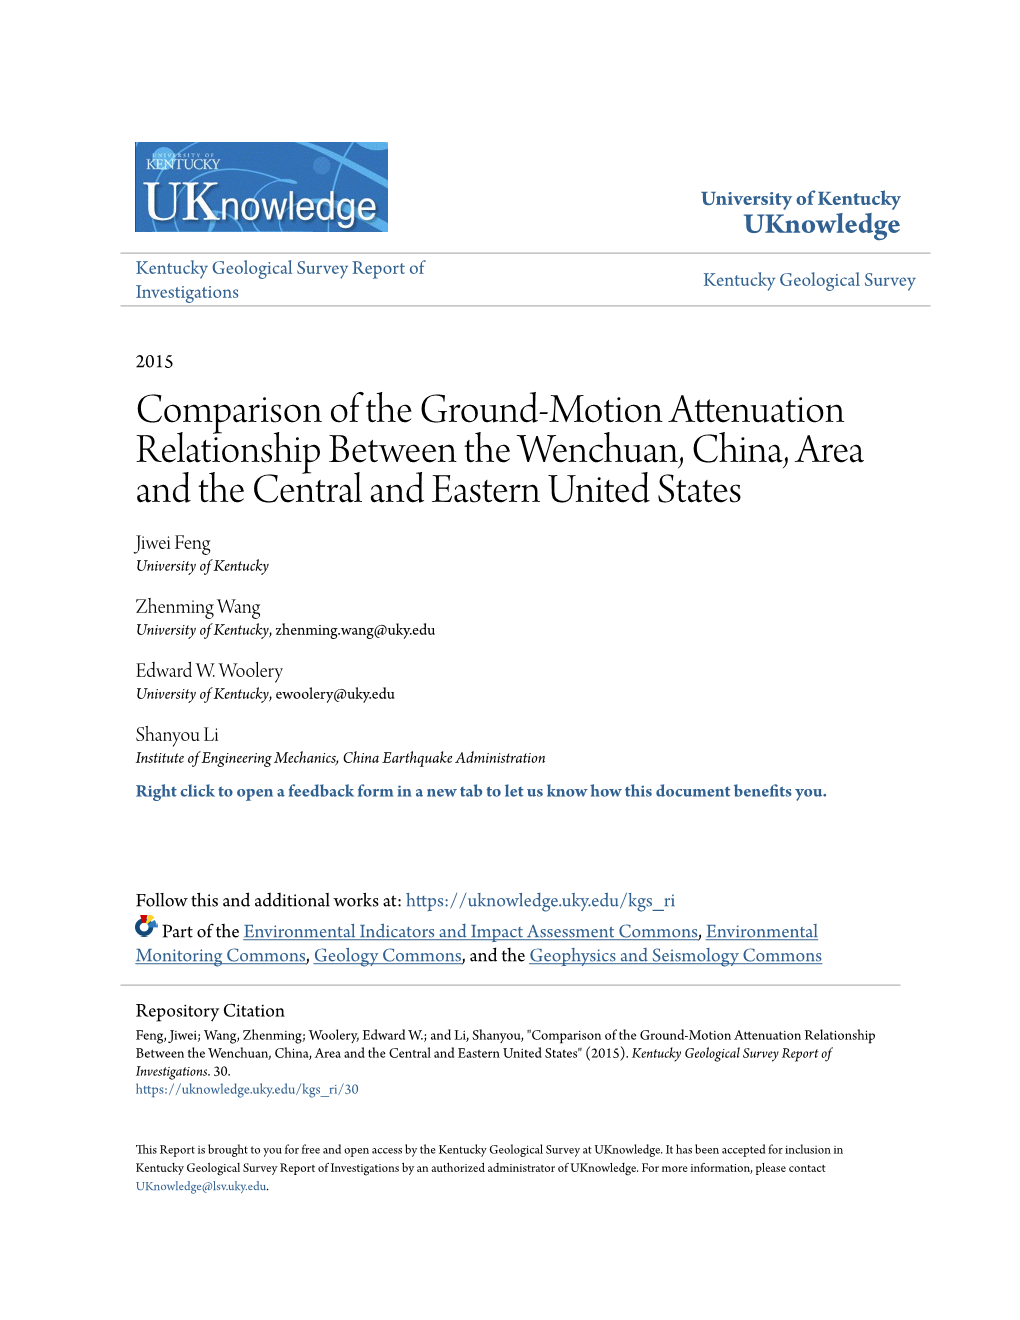 Comparison of the Ground-Motion Attenuation Relationship Between the Wenchuan, China, Area and the Central and Eastern United States Jiwei Feng University of Kentucky